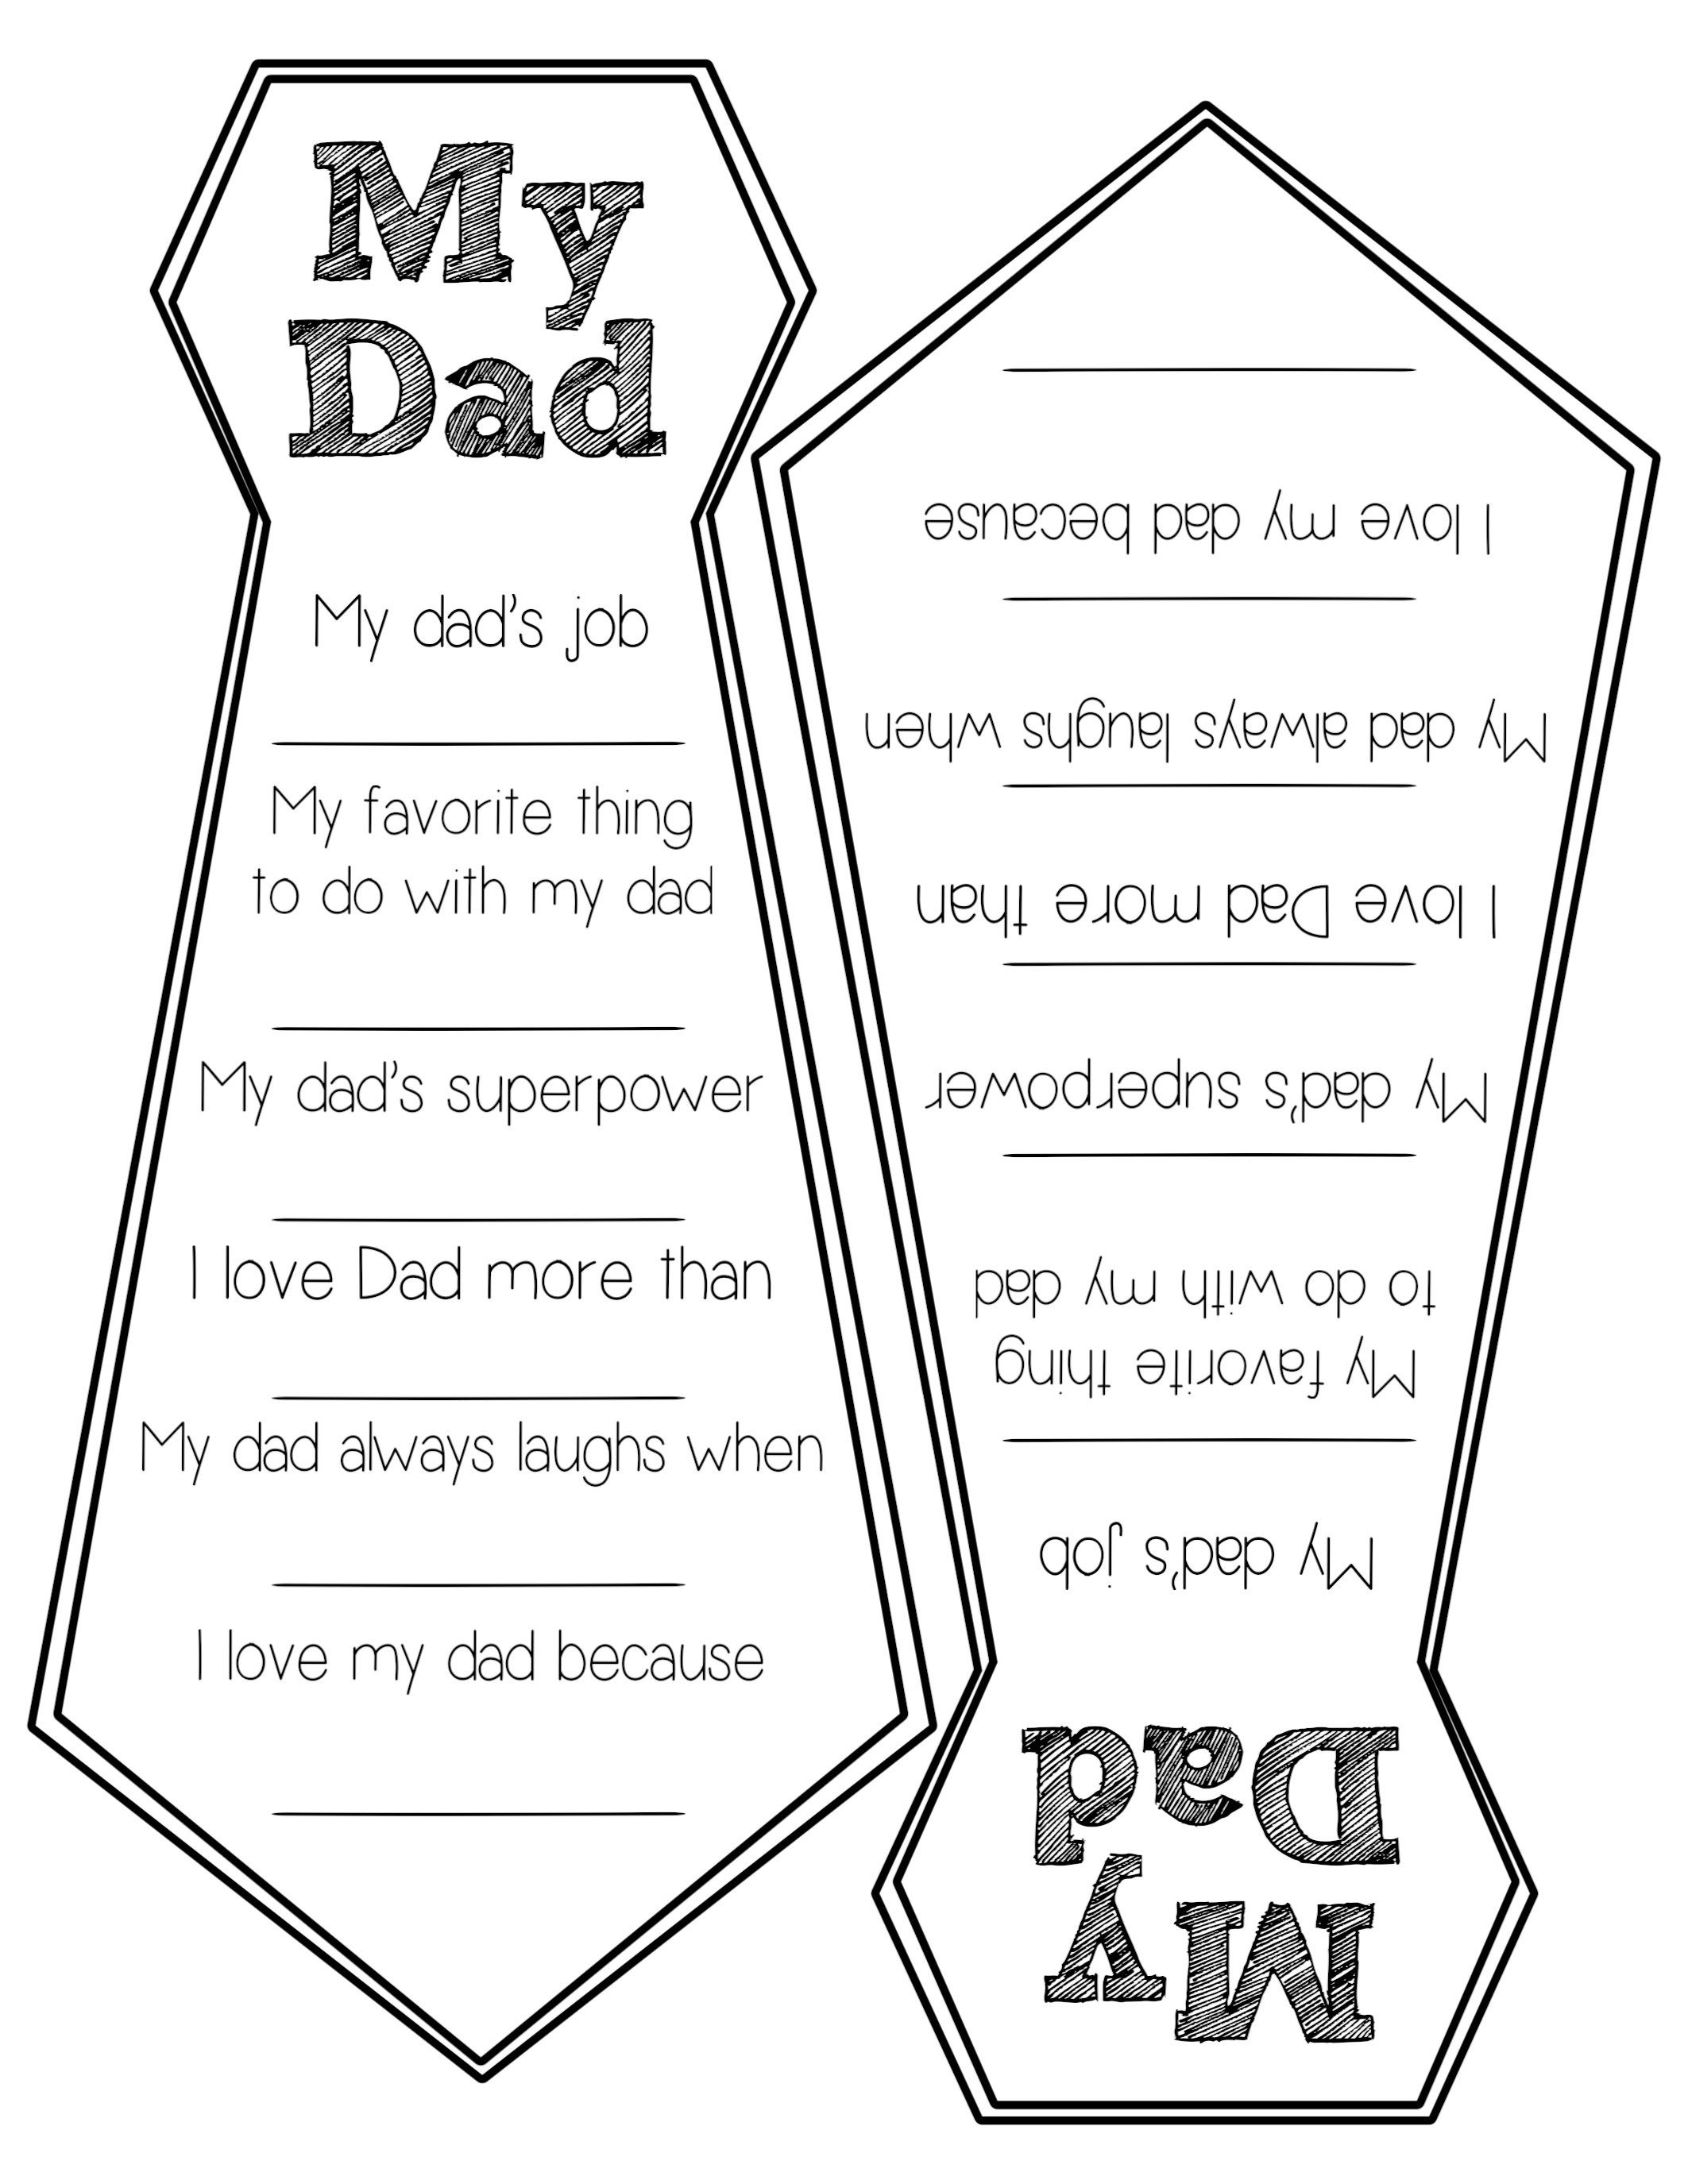 Father&amp;#039;s Day Free Printable Cards | Dads | Father&amp;#039;s Day Diy, Fathers - Free Printable Father&amp;amp;#039;s Day Card From Wife To Husband